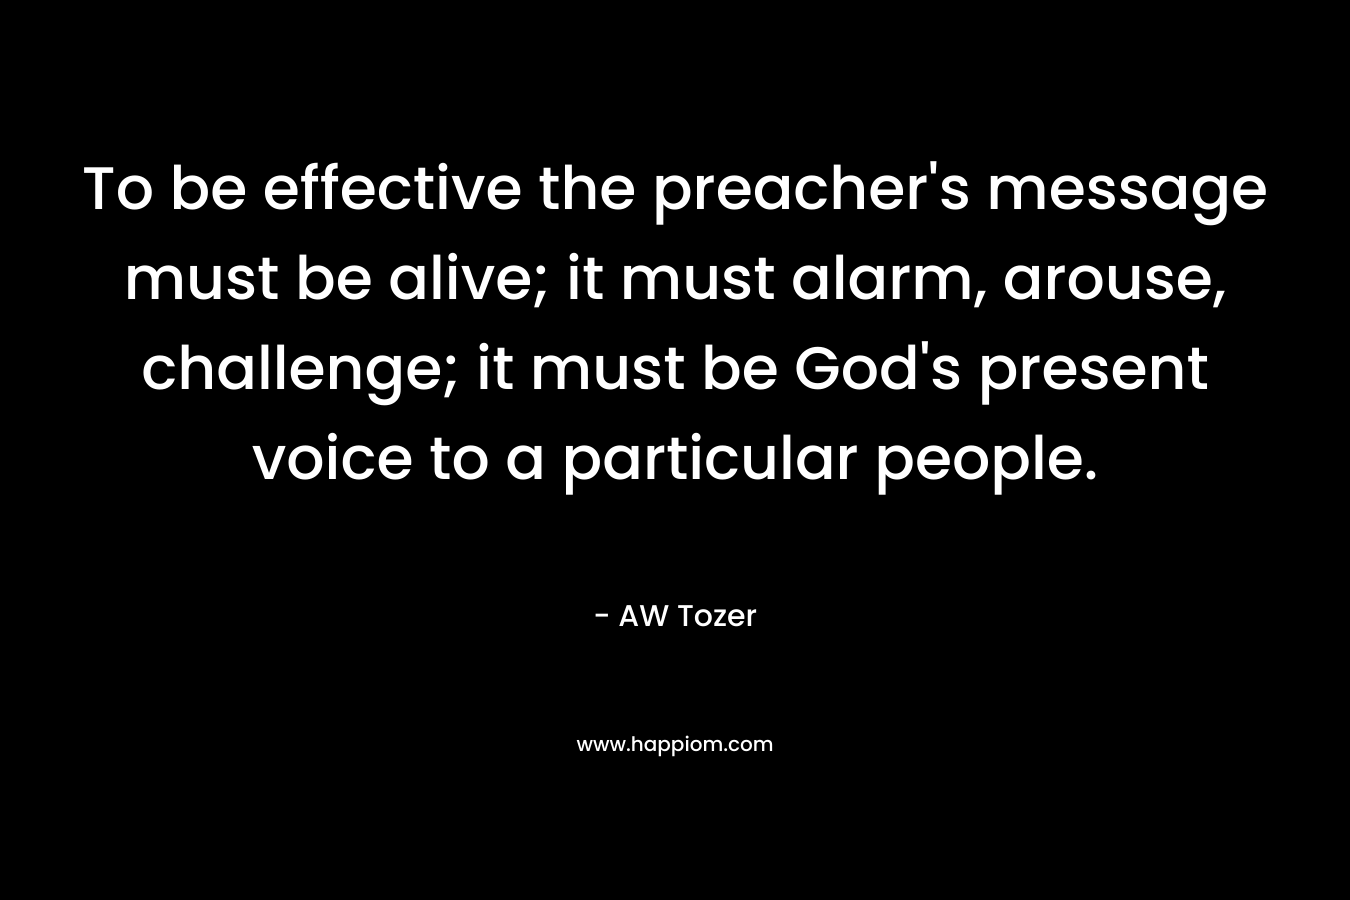 To be effective the preacher's message must be alive; it must alarm, arouse, challenge; it must be God's present voice to a particular people.